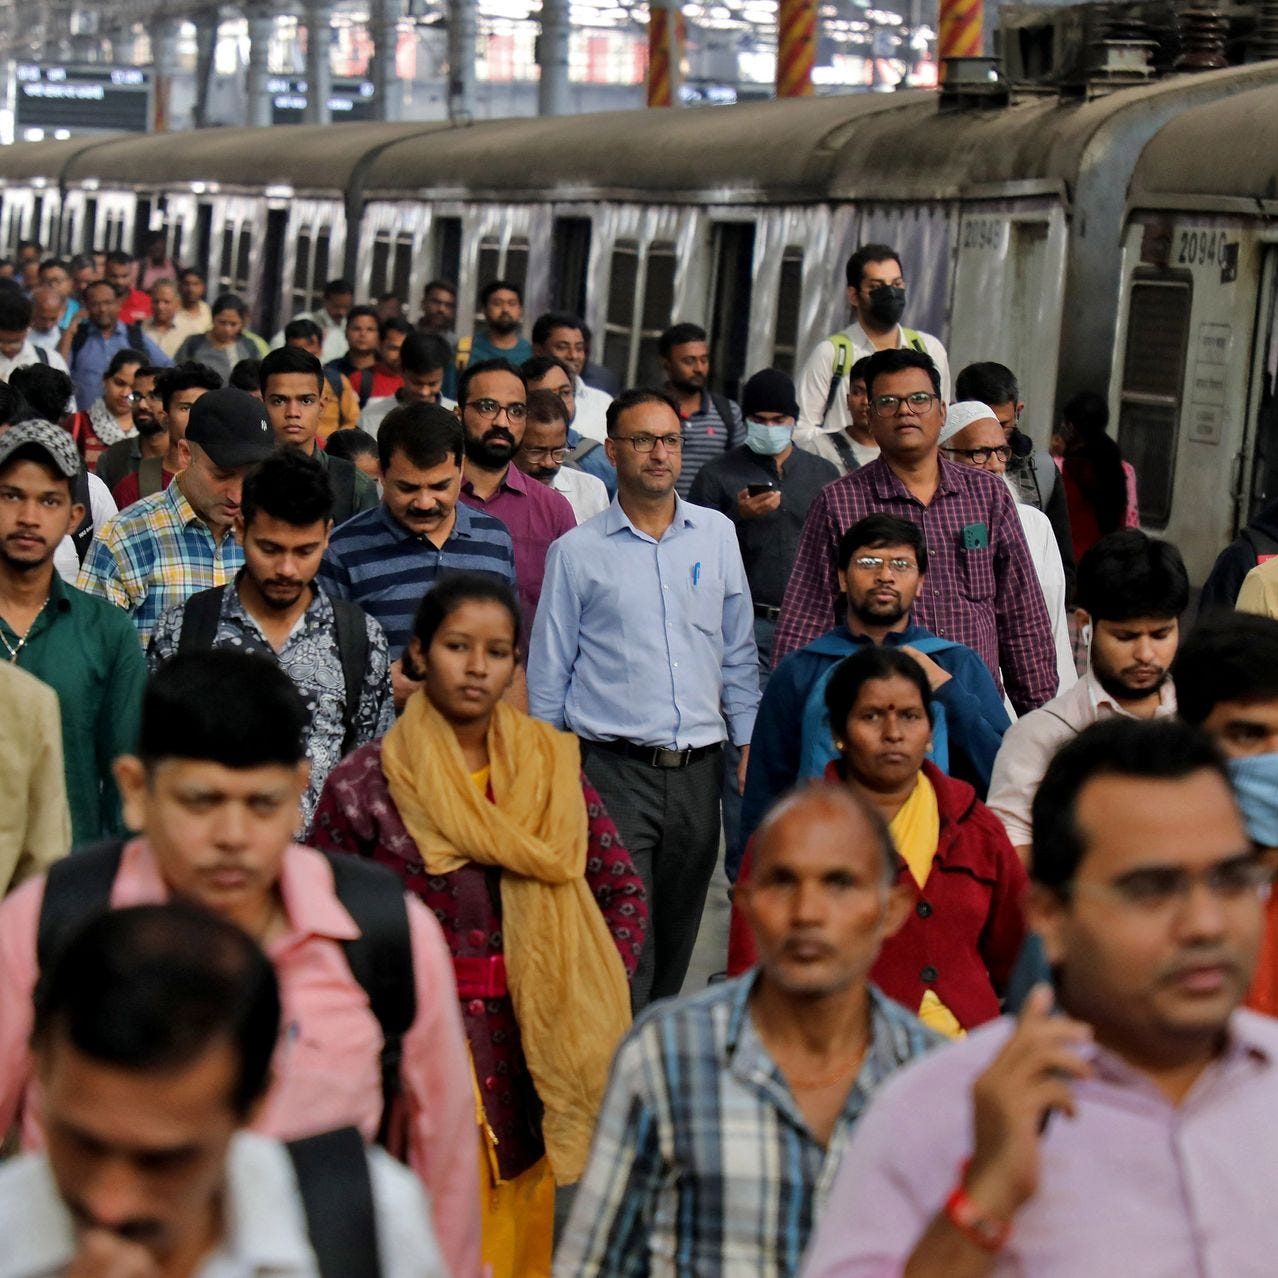 Commuters in Mumbai. India’s population is expected to reach 1.429 billion by the end of the year.